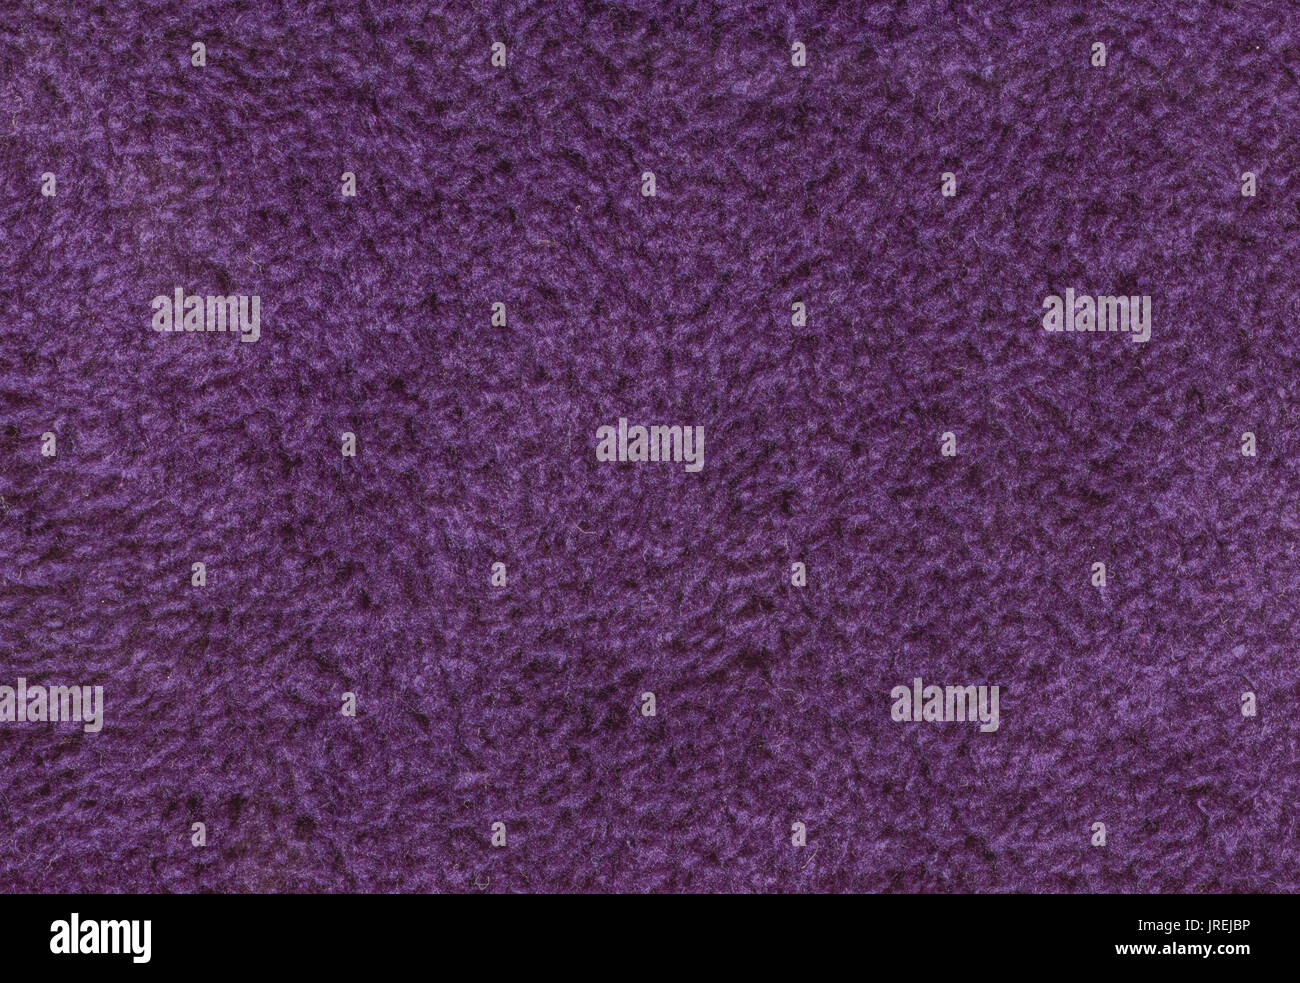 Purple double sided terry towelling fabric texture background Stock Photo